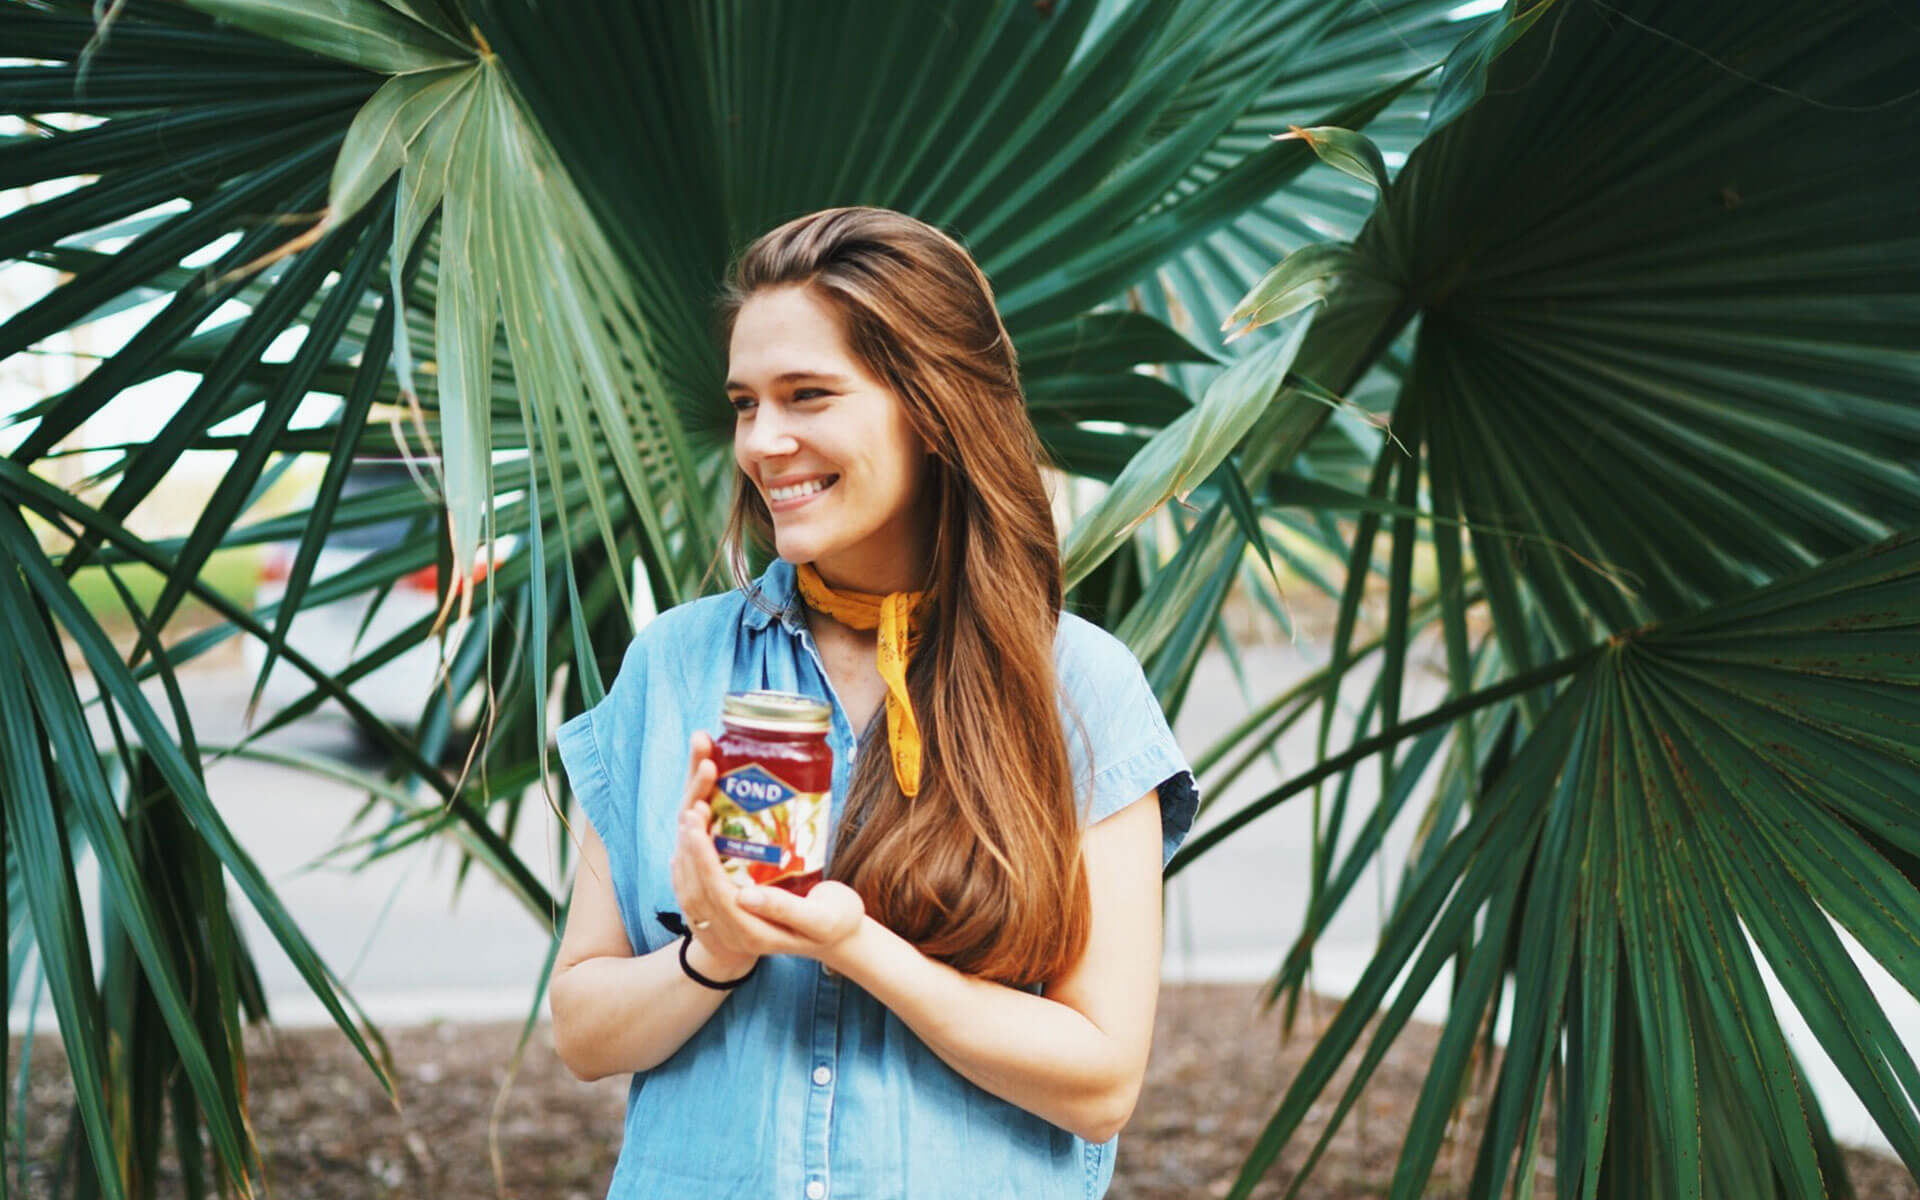 Alysa Seeland holding a jar of bone broth from her company